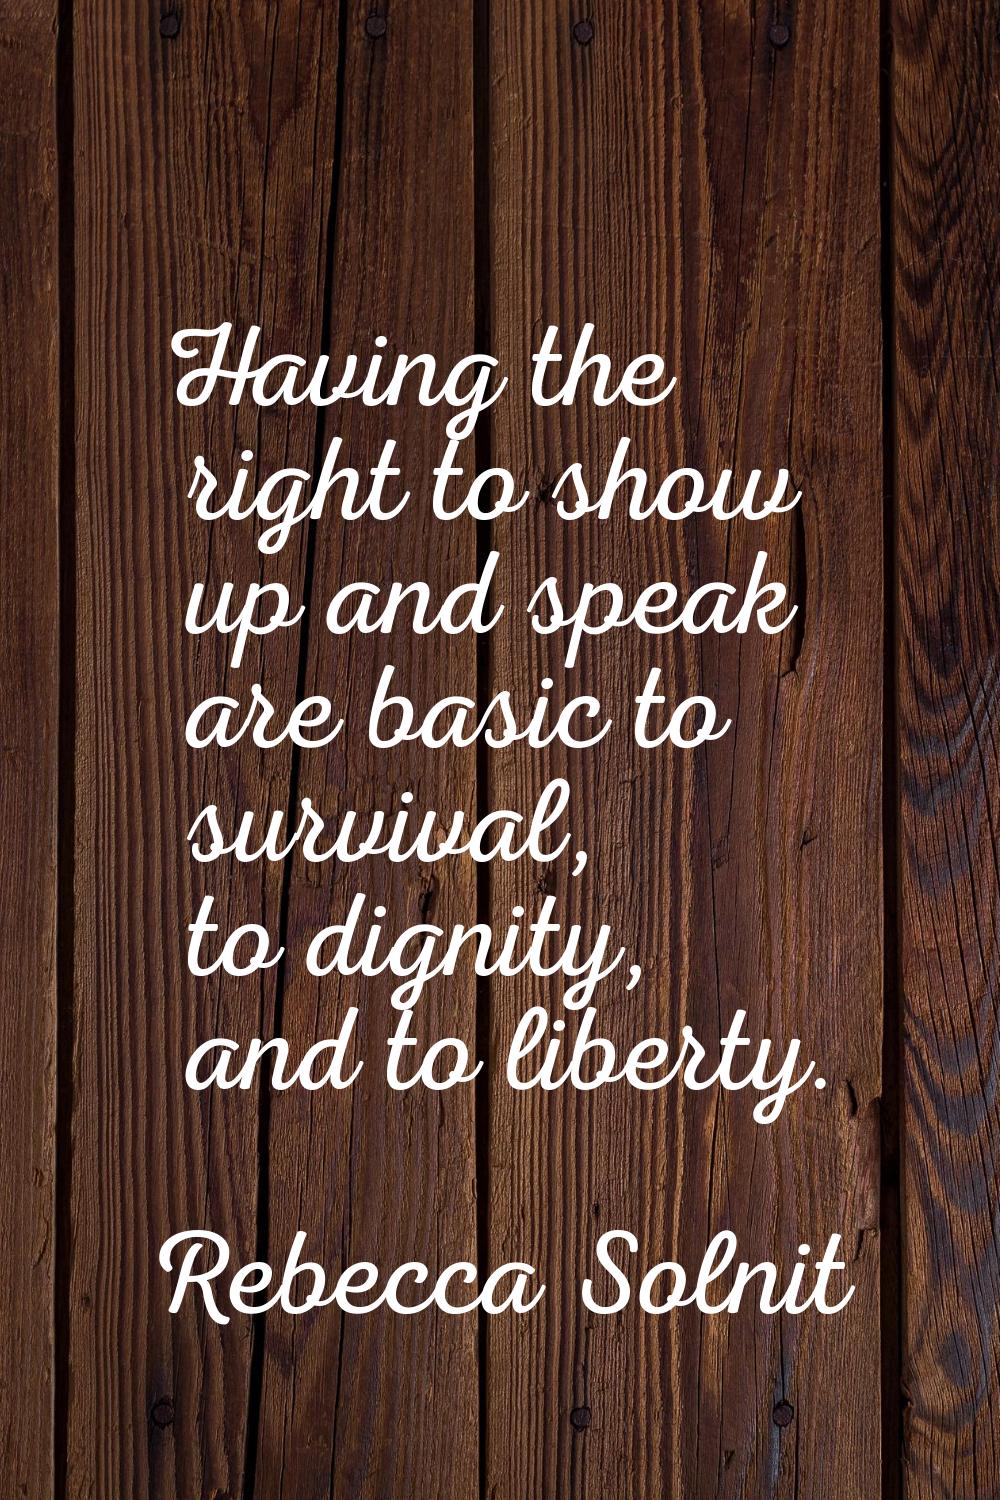 Having the right to show up and speak are basic to survival, to dignity, and to liberty.